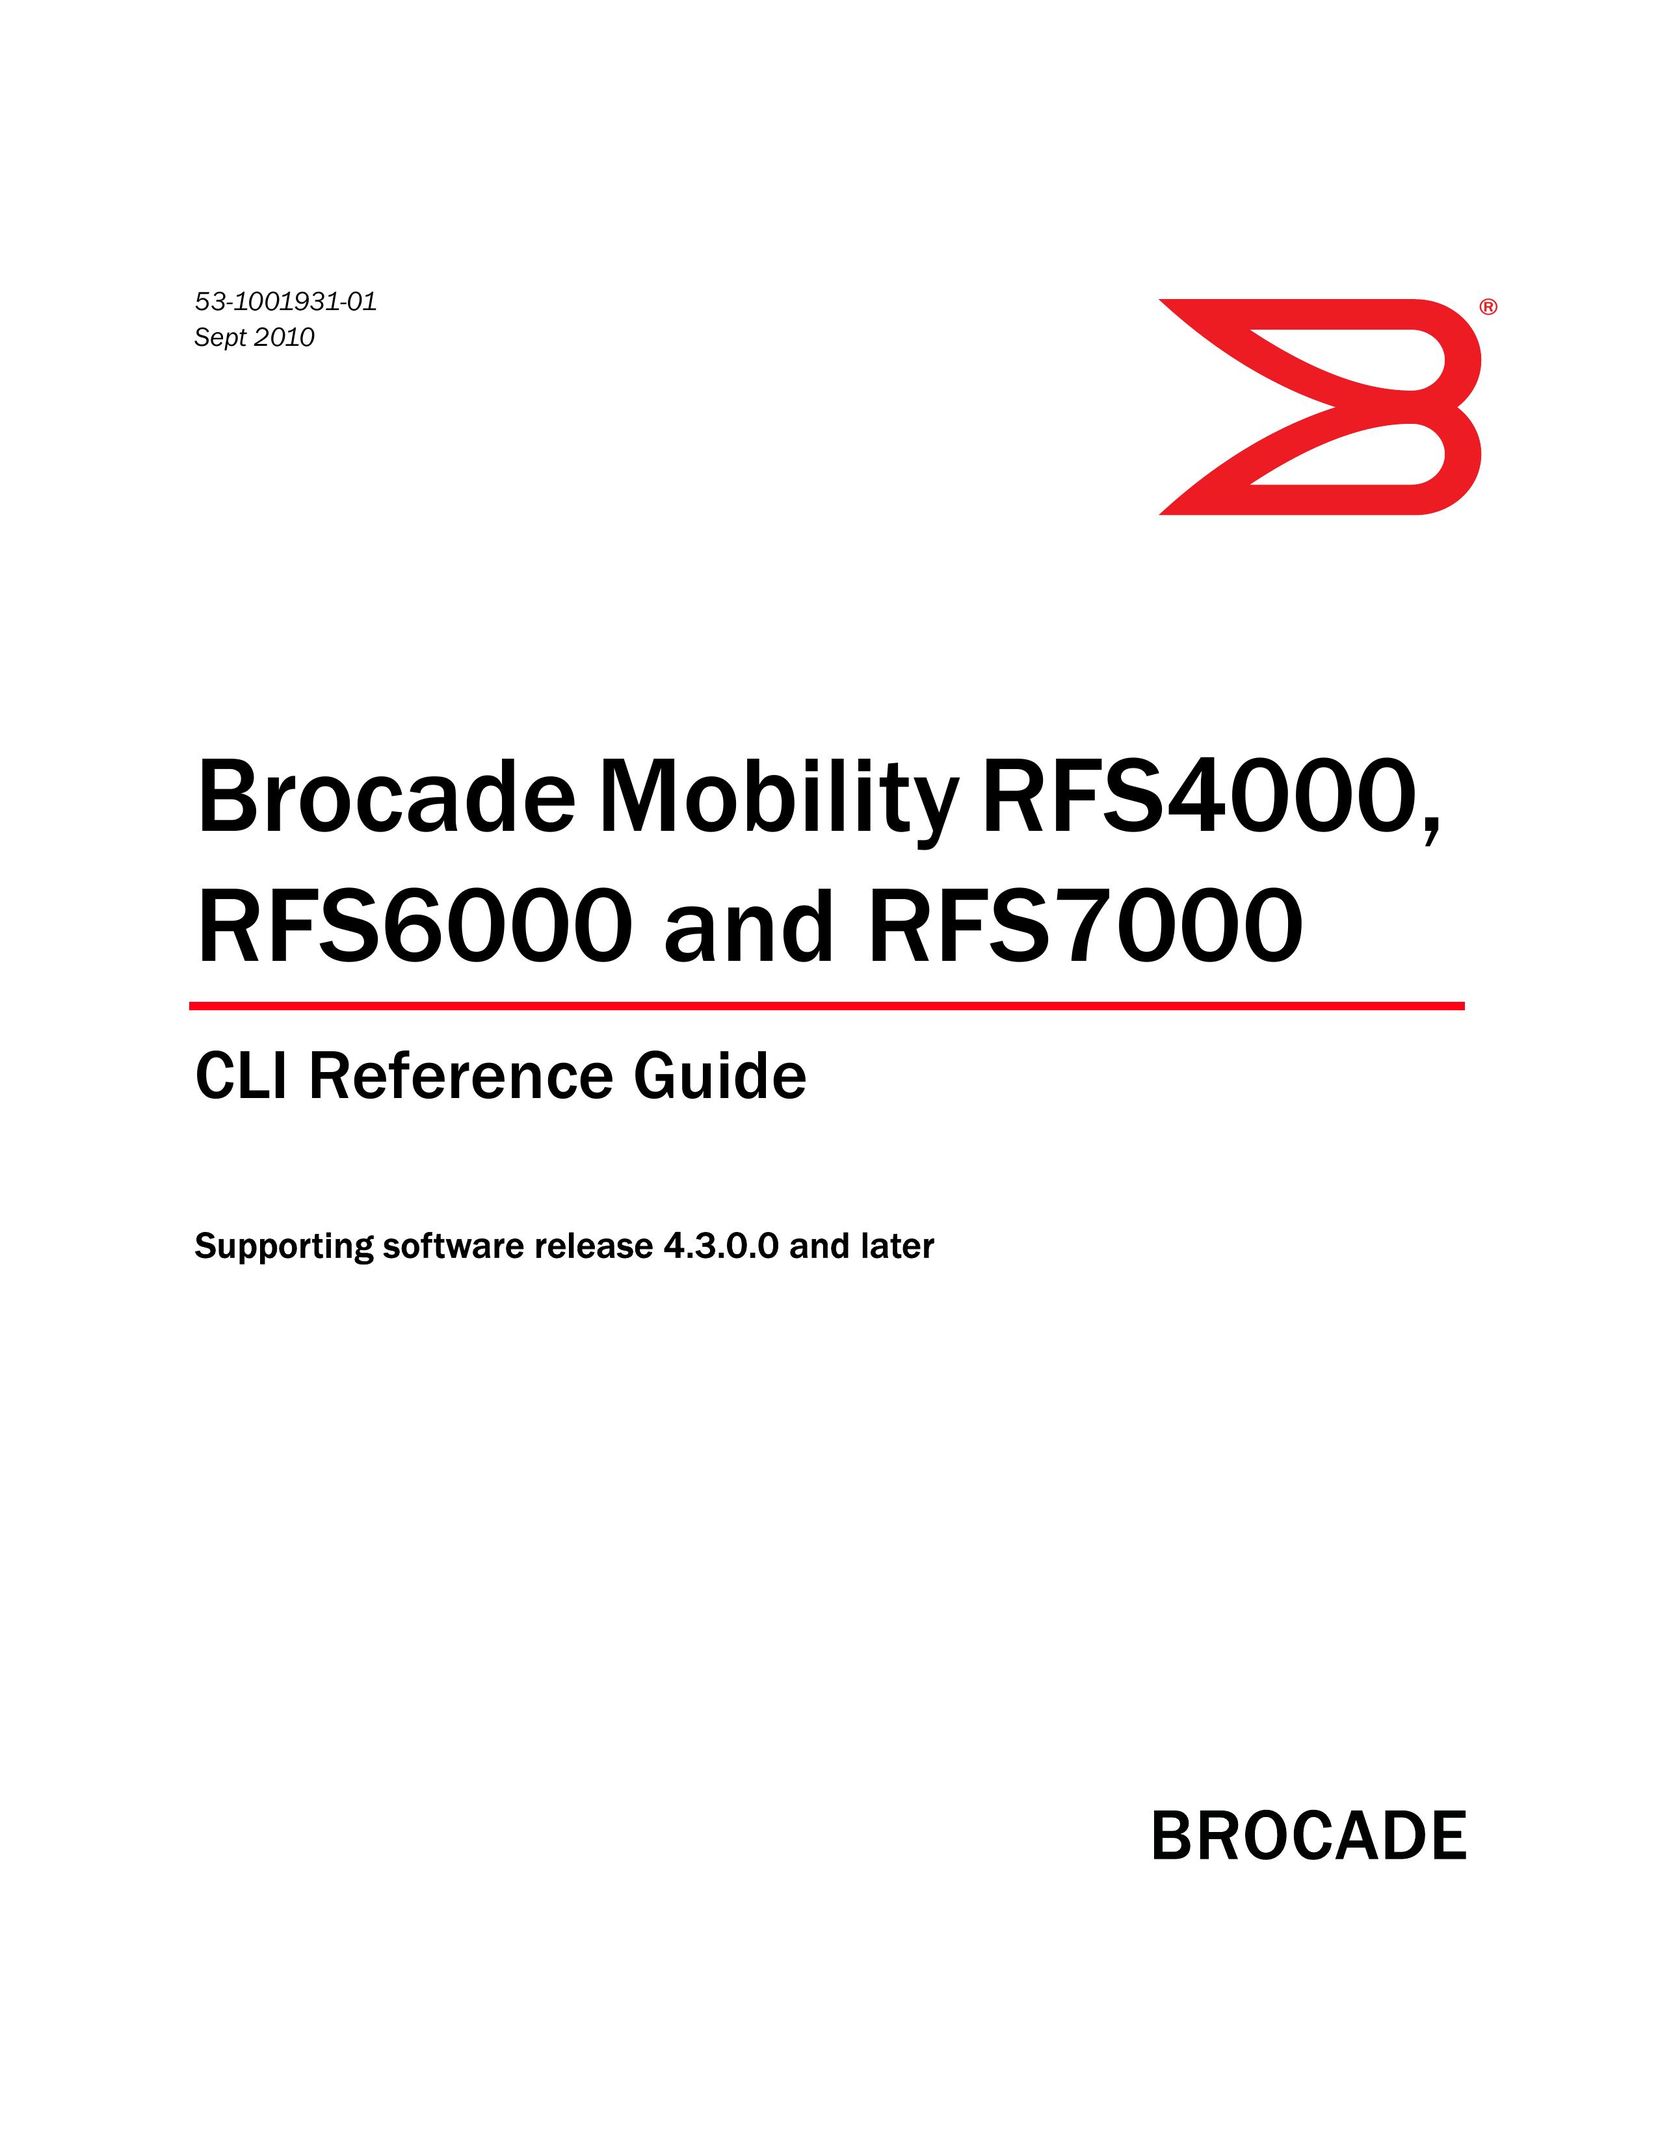 Brocade Communications Systems RFS6000 Network Router User Manual